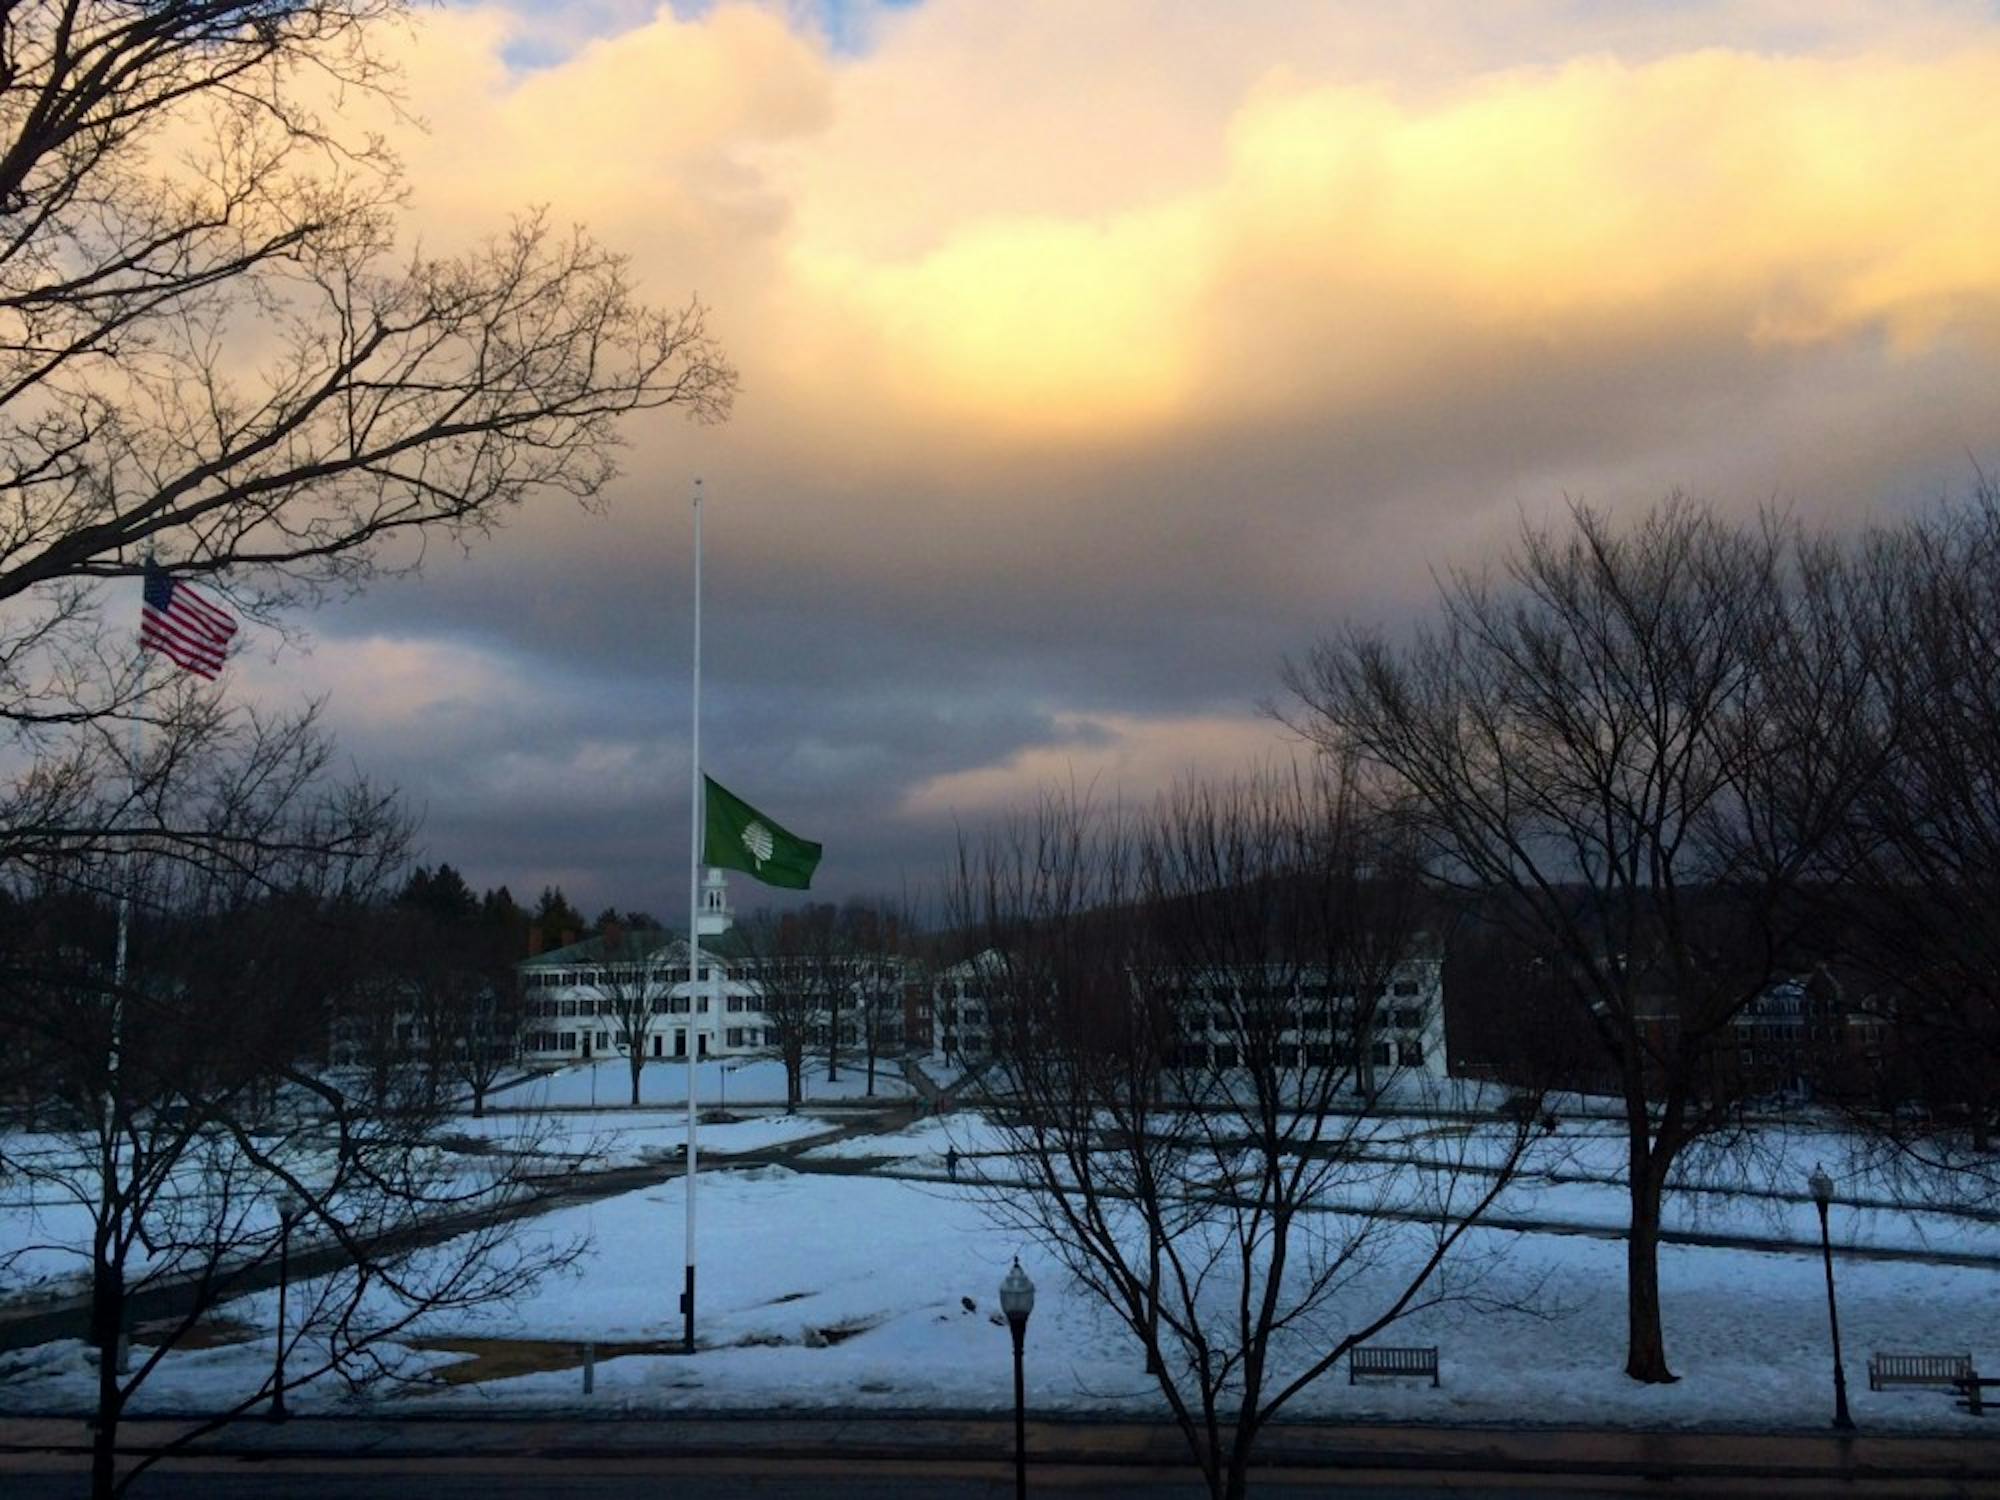 The Dartmouth flag flew at half mast on Saturday to honor Blaine Steinberg '15, who died suddenly on Friday.